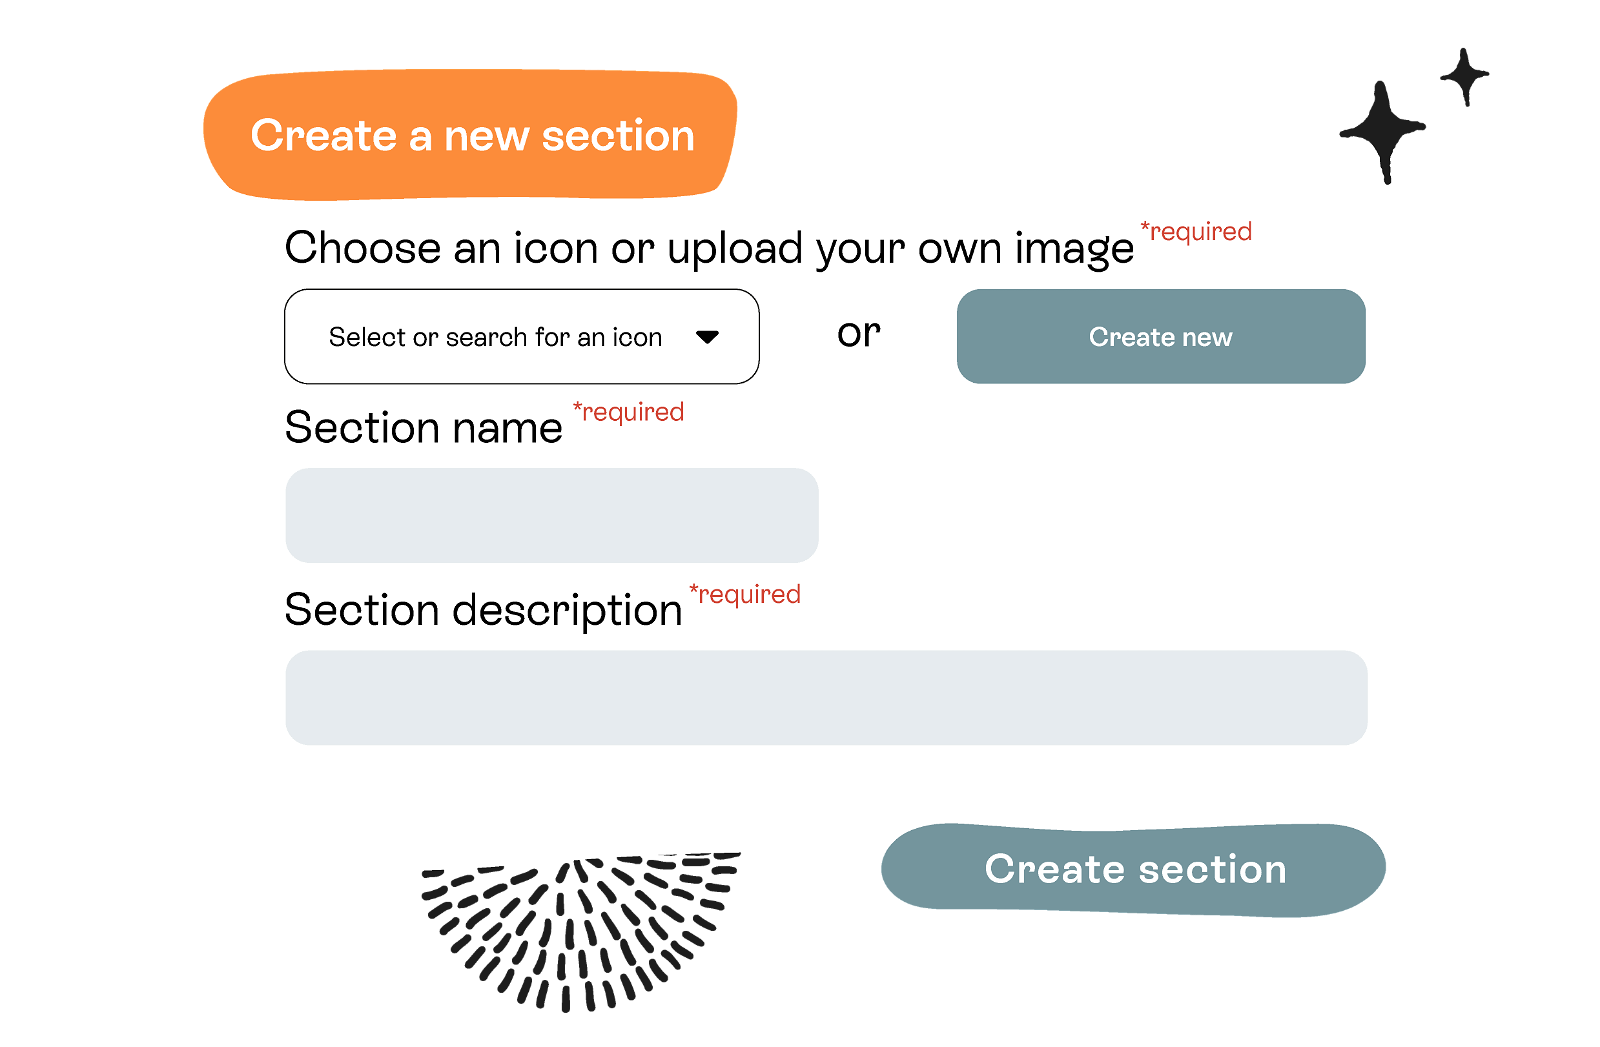 stribe - a little design showing how to create a new section within stribe's resource tool